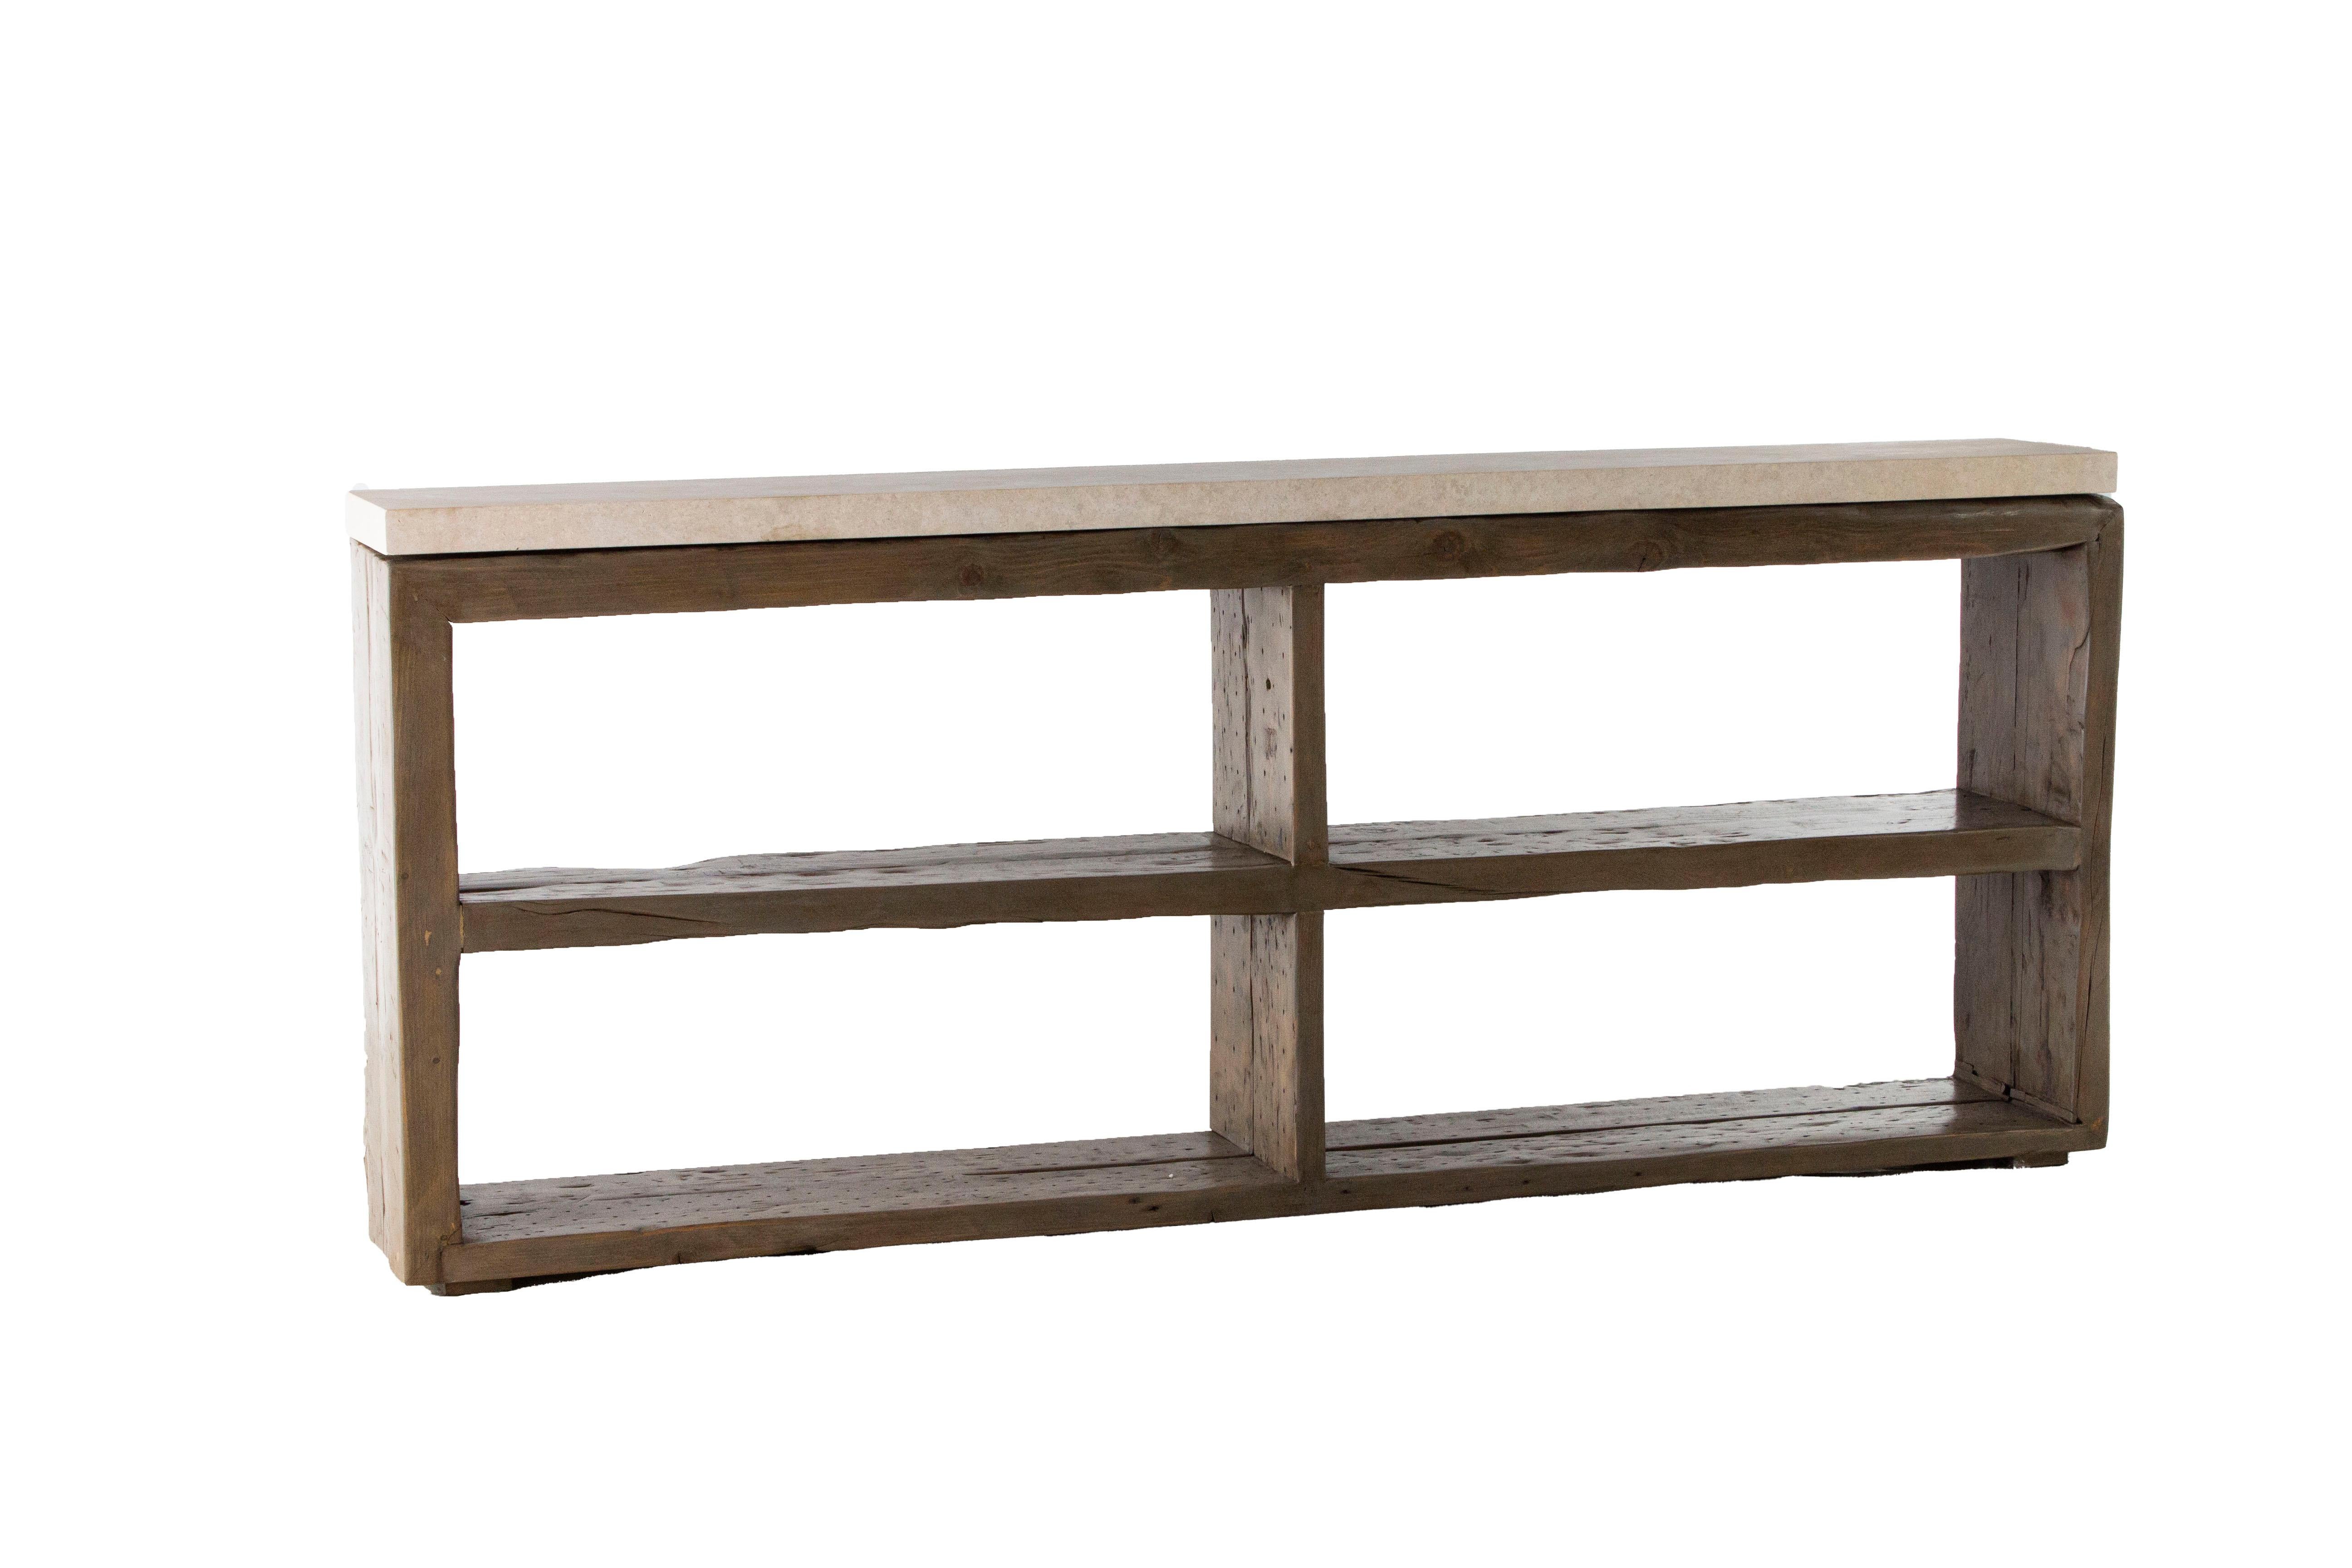 Draw the eye to your space with this striking two-level console. This one of a kind Two Level Open Shelf Console features a two-level design that is perfect for placing books, items, or photos on top. The hand-crafted wooden frame adds an element of